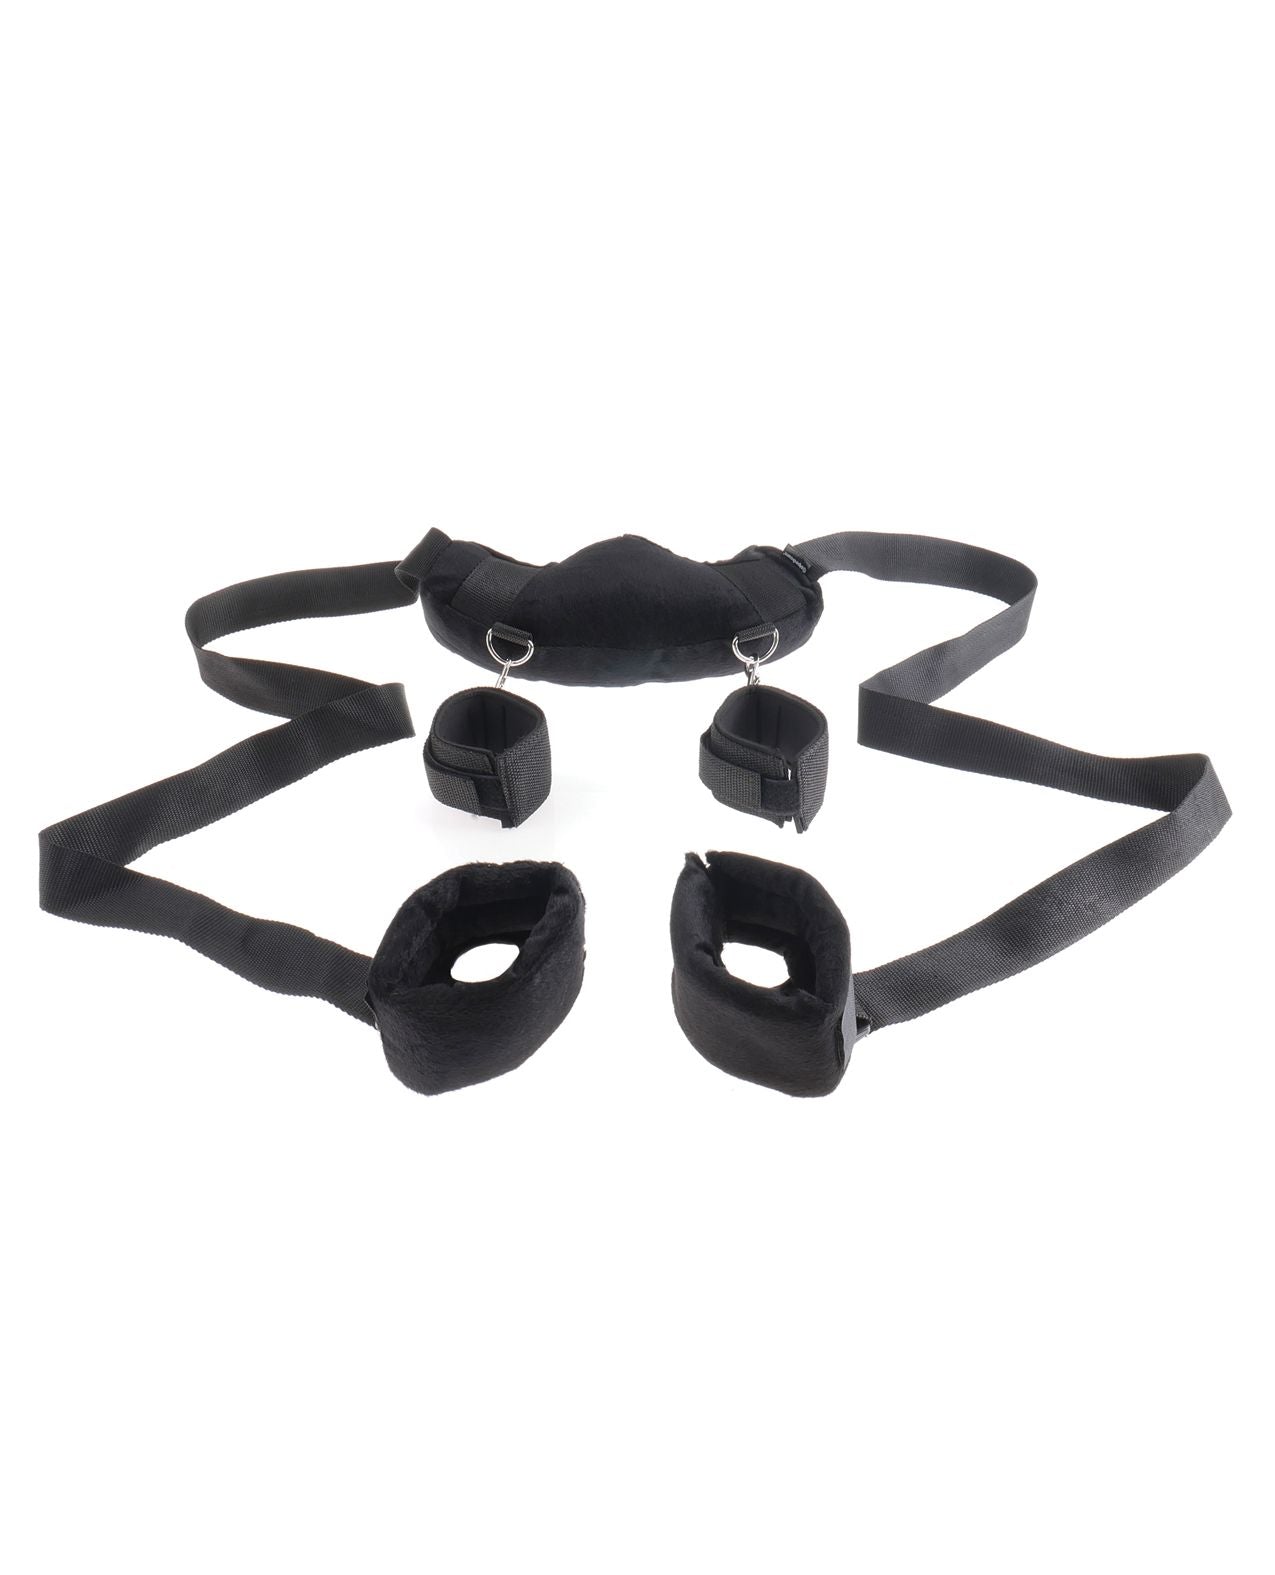 Fetish Fantasy Series Position Master with Cuffs Shipmysextoys